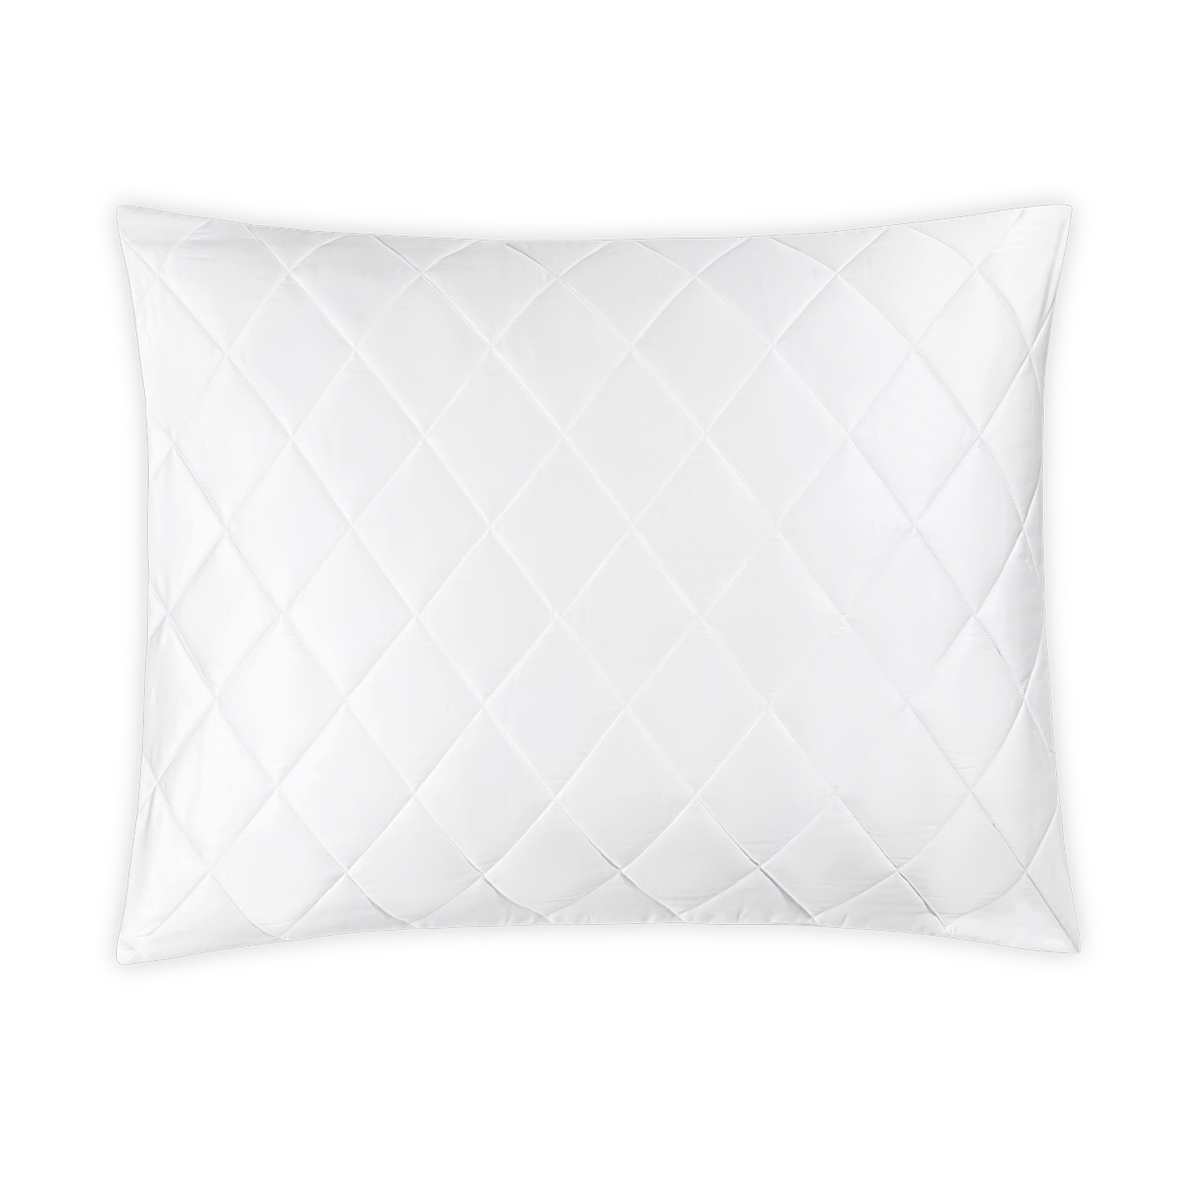 Silo Image of Matouk Nocturne Quilted Bedding Sham in White